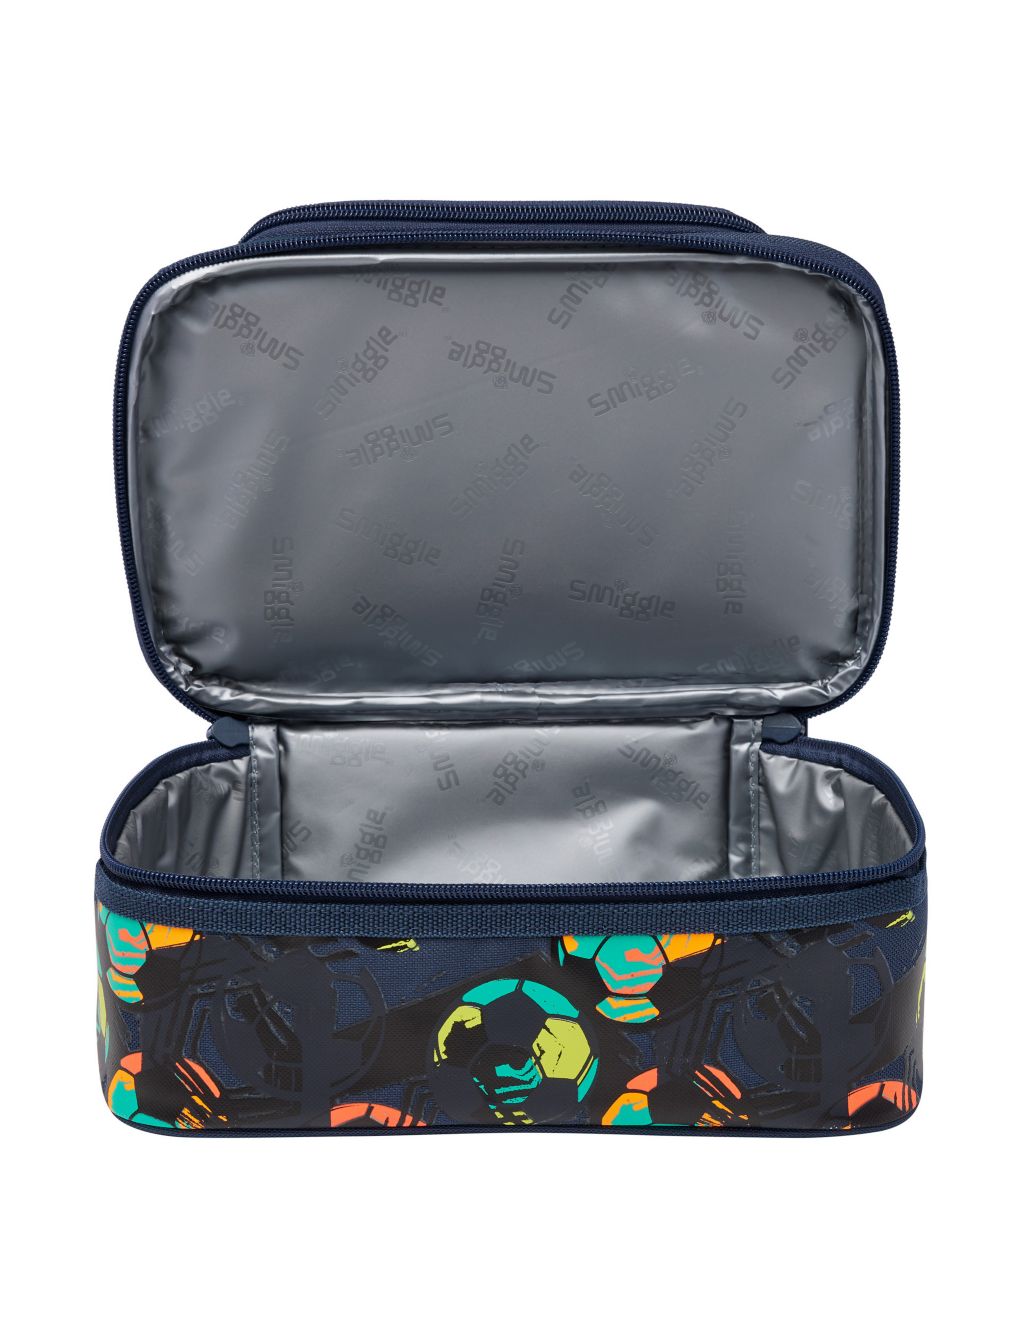 Kids' Patterned Lunch Box | SMIGGLE | M&S